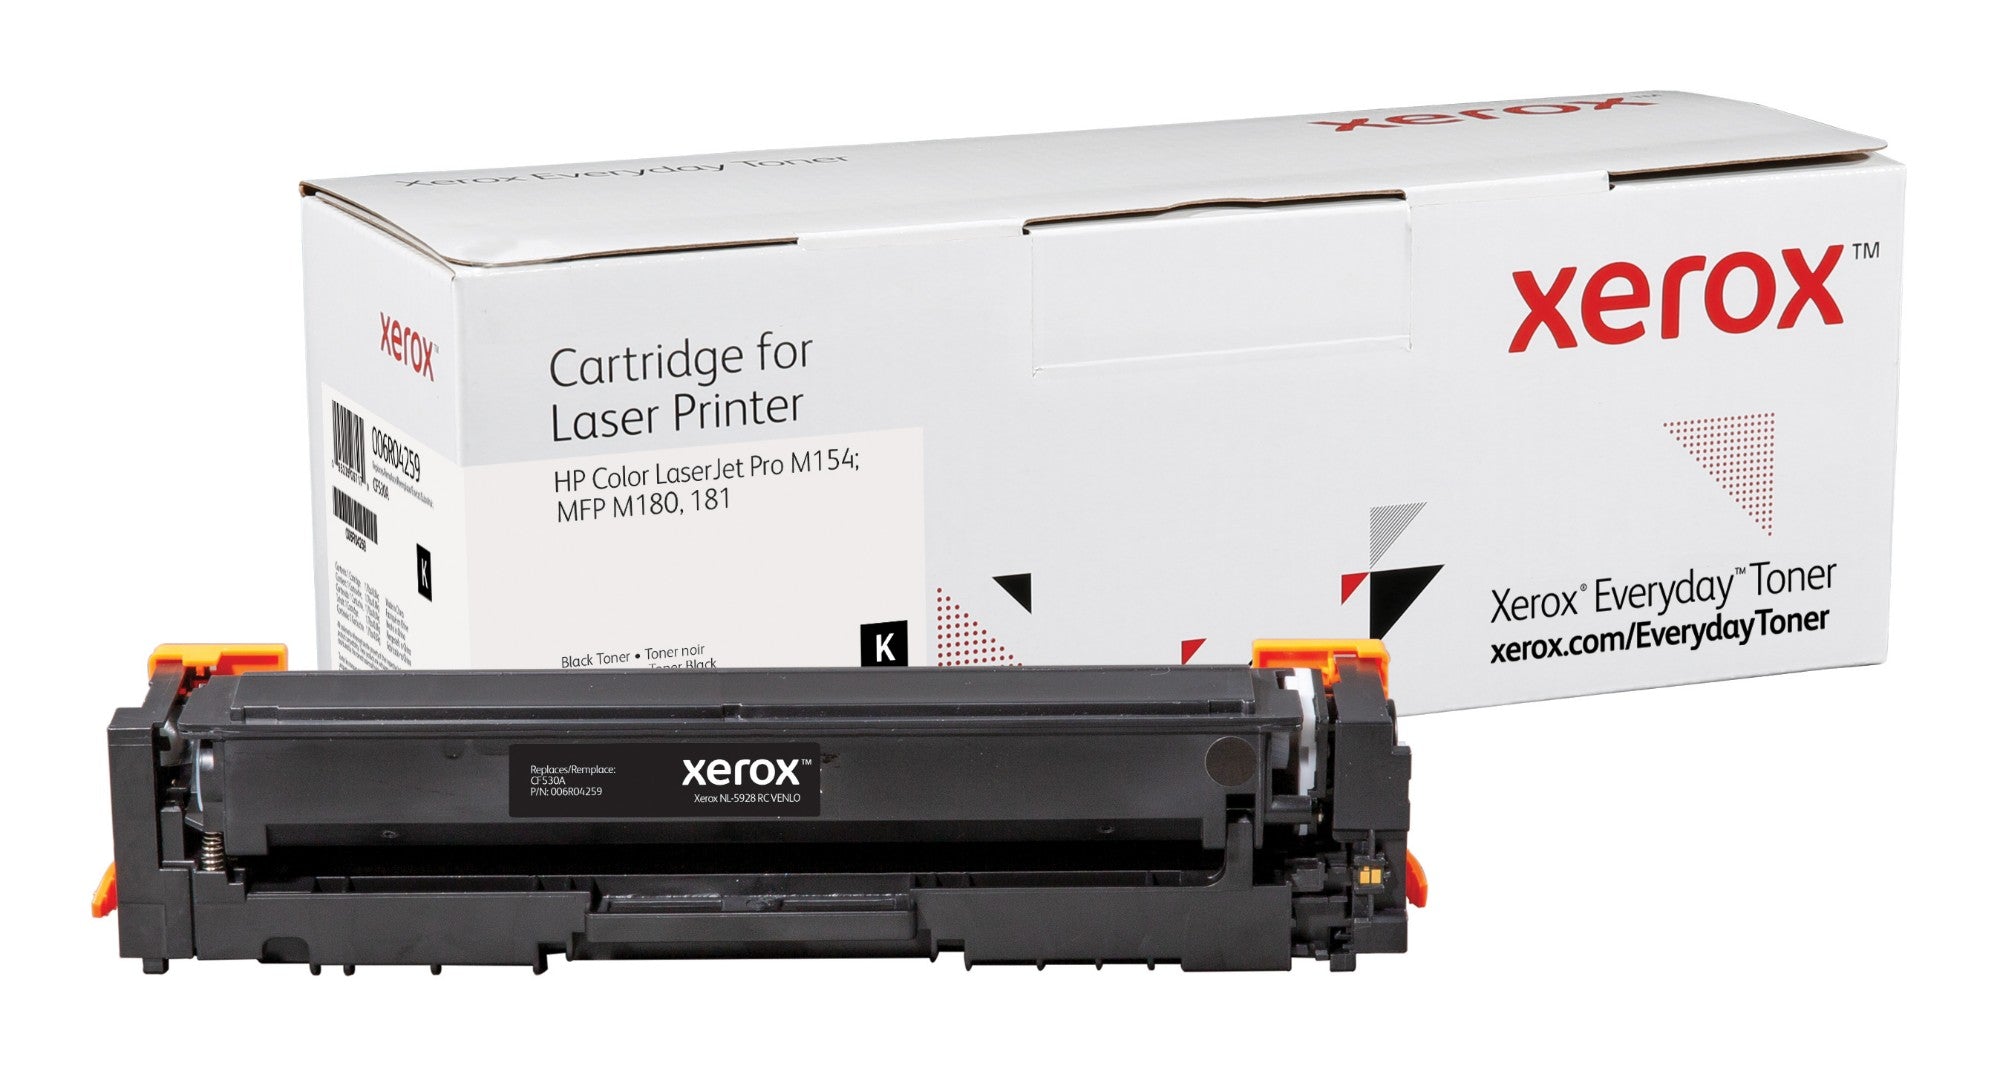 Xerox 006R04259 Toner Cartridge Black, 1.1K Pages (Replaces HP 205Acf530A) For HP Mfp 180-(006R04259)